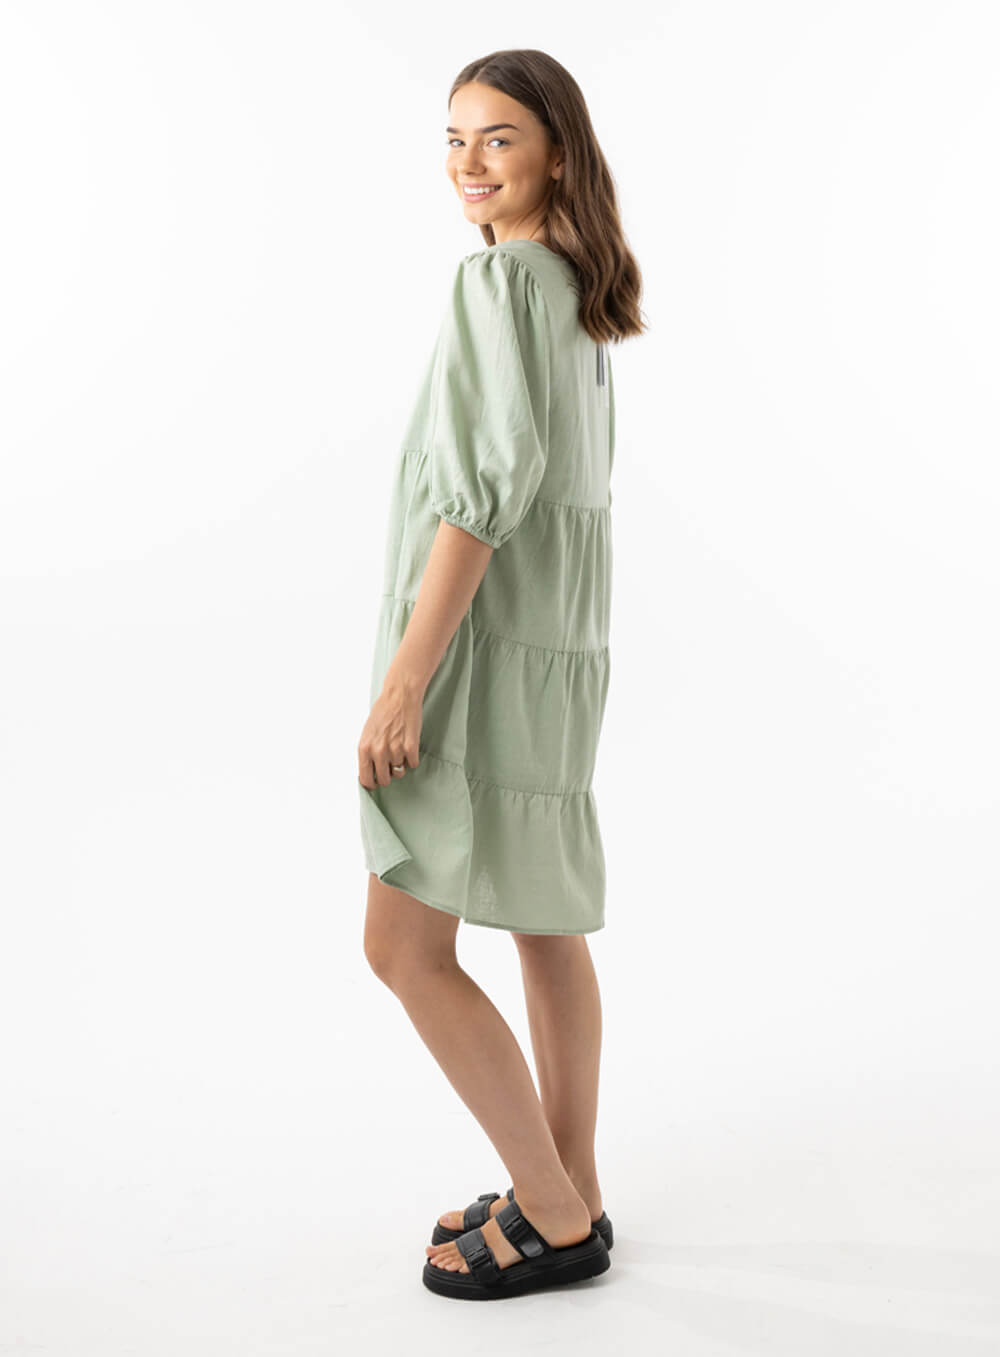 The Eleanor mini dress in sage features a flowing layered a line shape with draping linen/viscose fabric, puff 3/4 sleeves with elastic cuff which can be pushed up to the elbow, a dropped v shape neckline with a square finish.